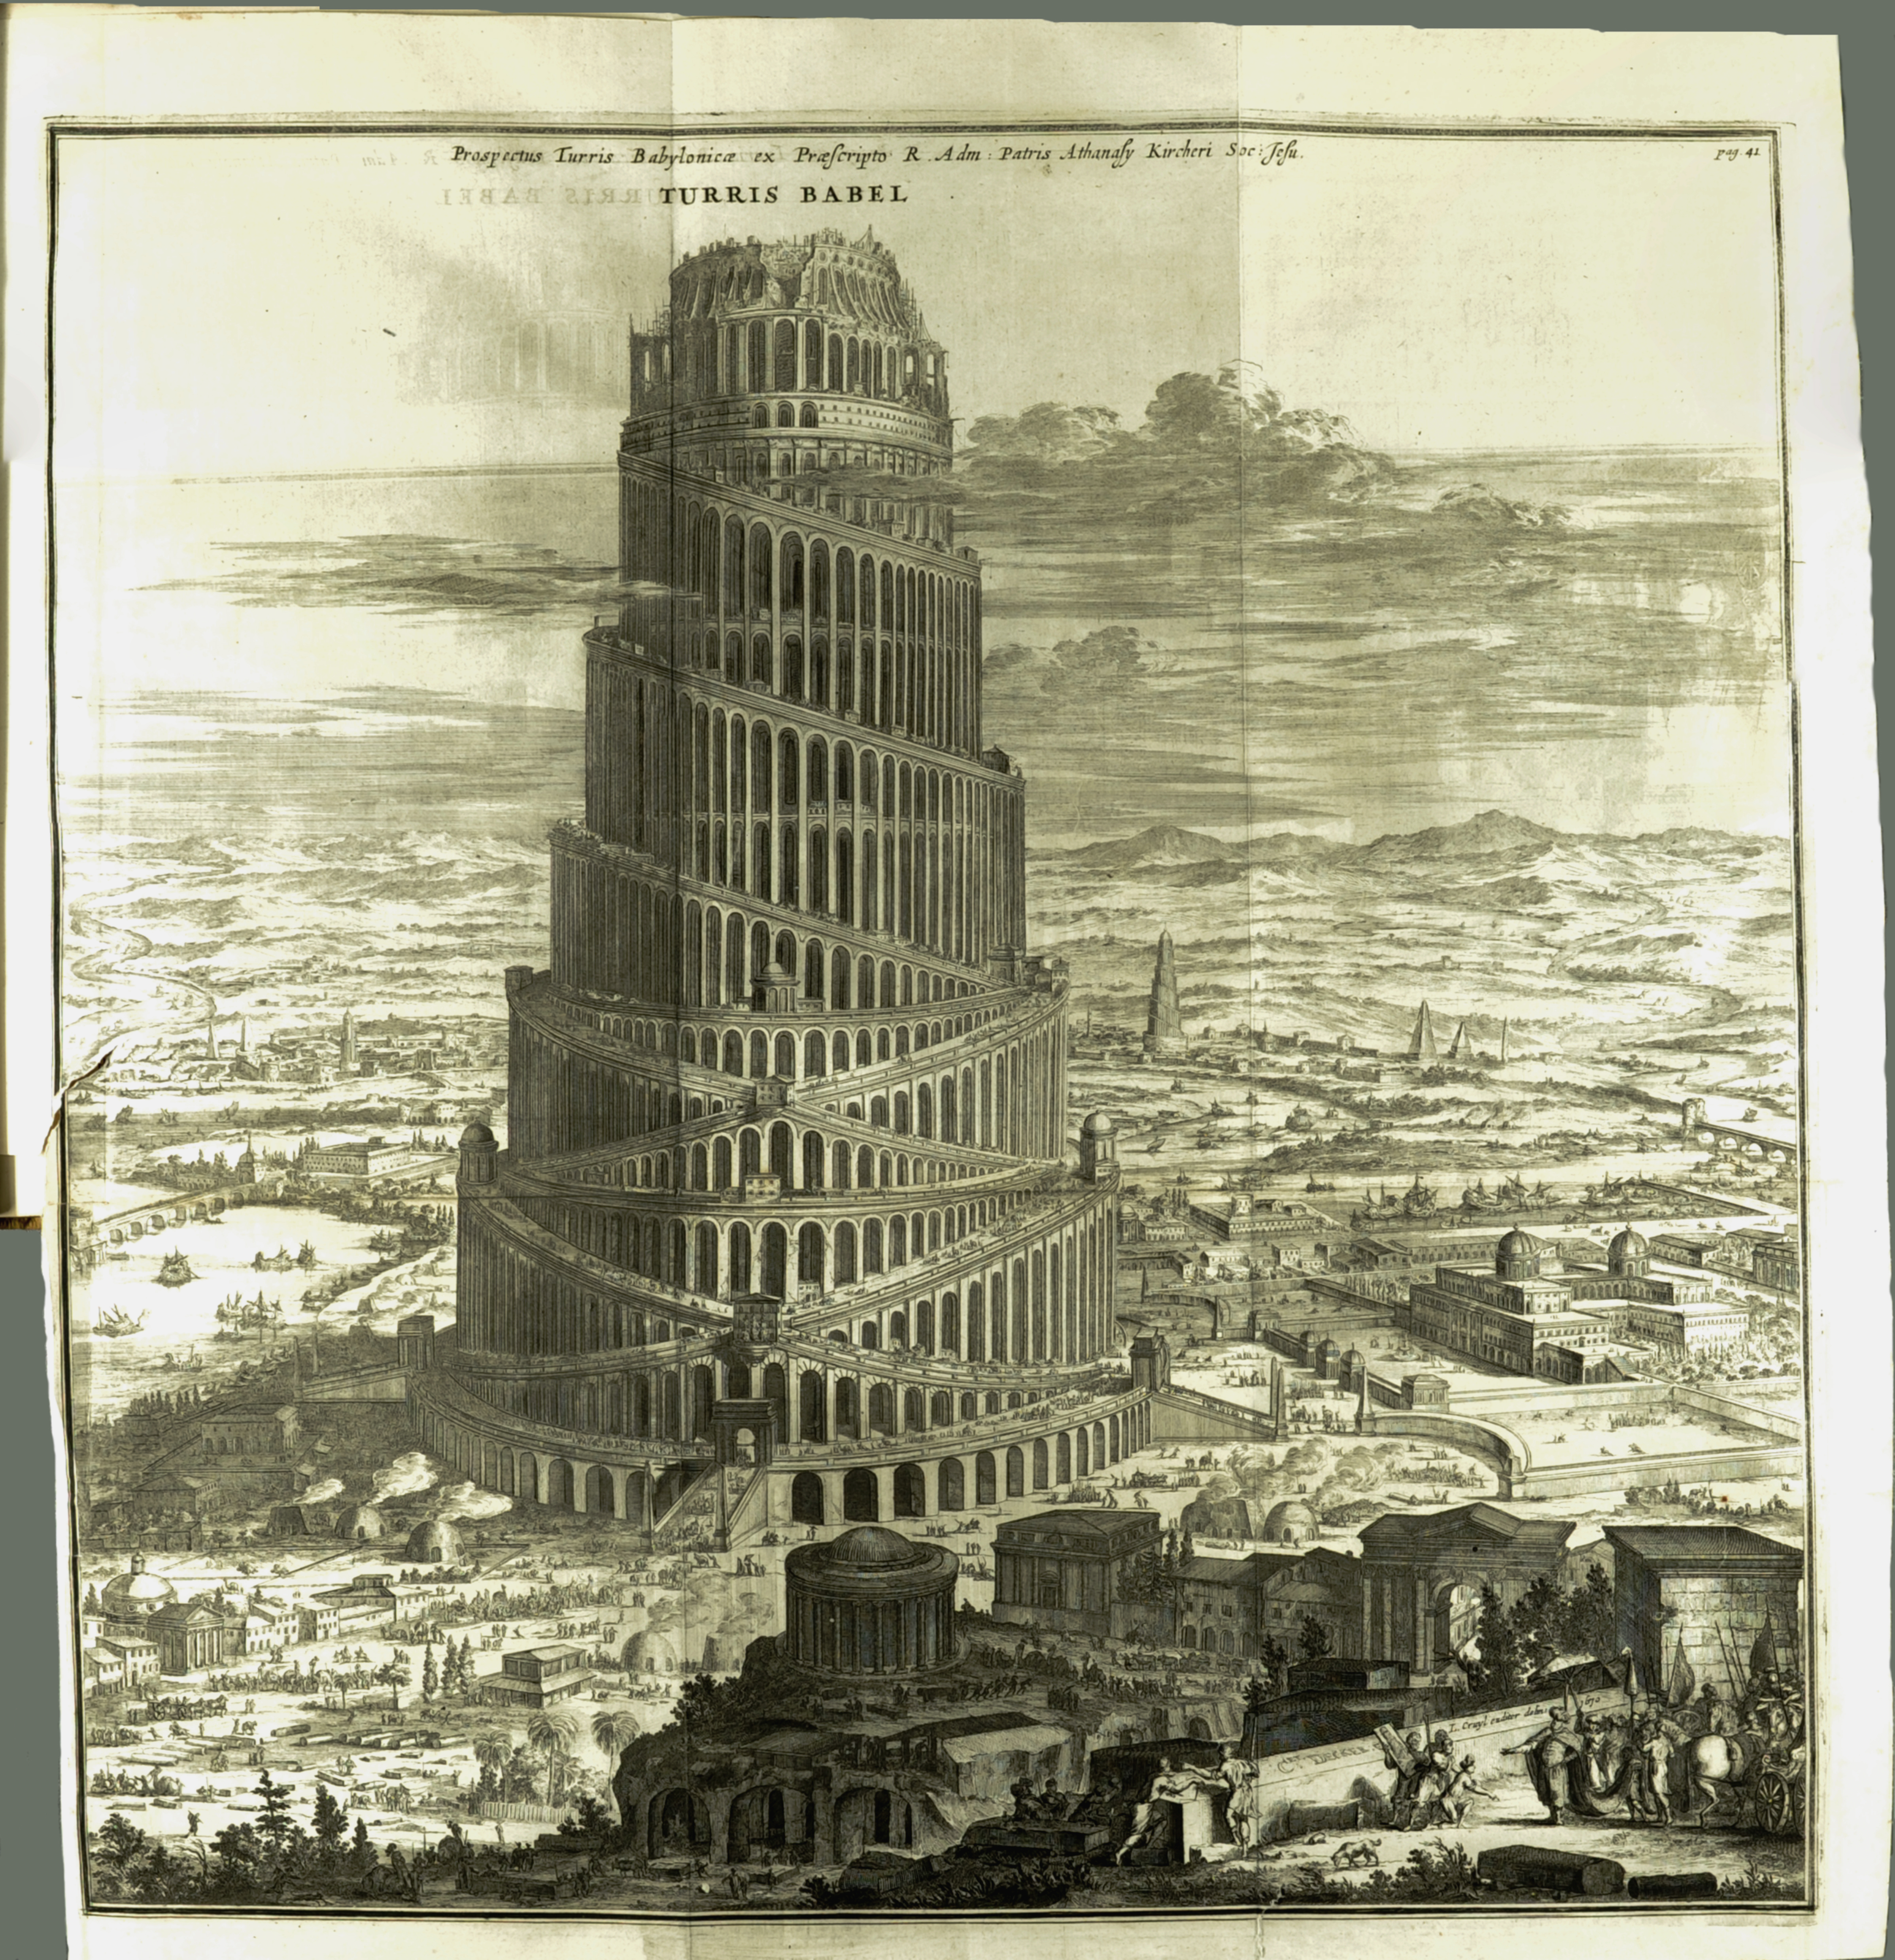 The large, fold-out plate of Kircher's vision of the Tower of Babel. From his Turris Babel, 1679 (St Andrews copy r17 BS1238.B2K5)